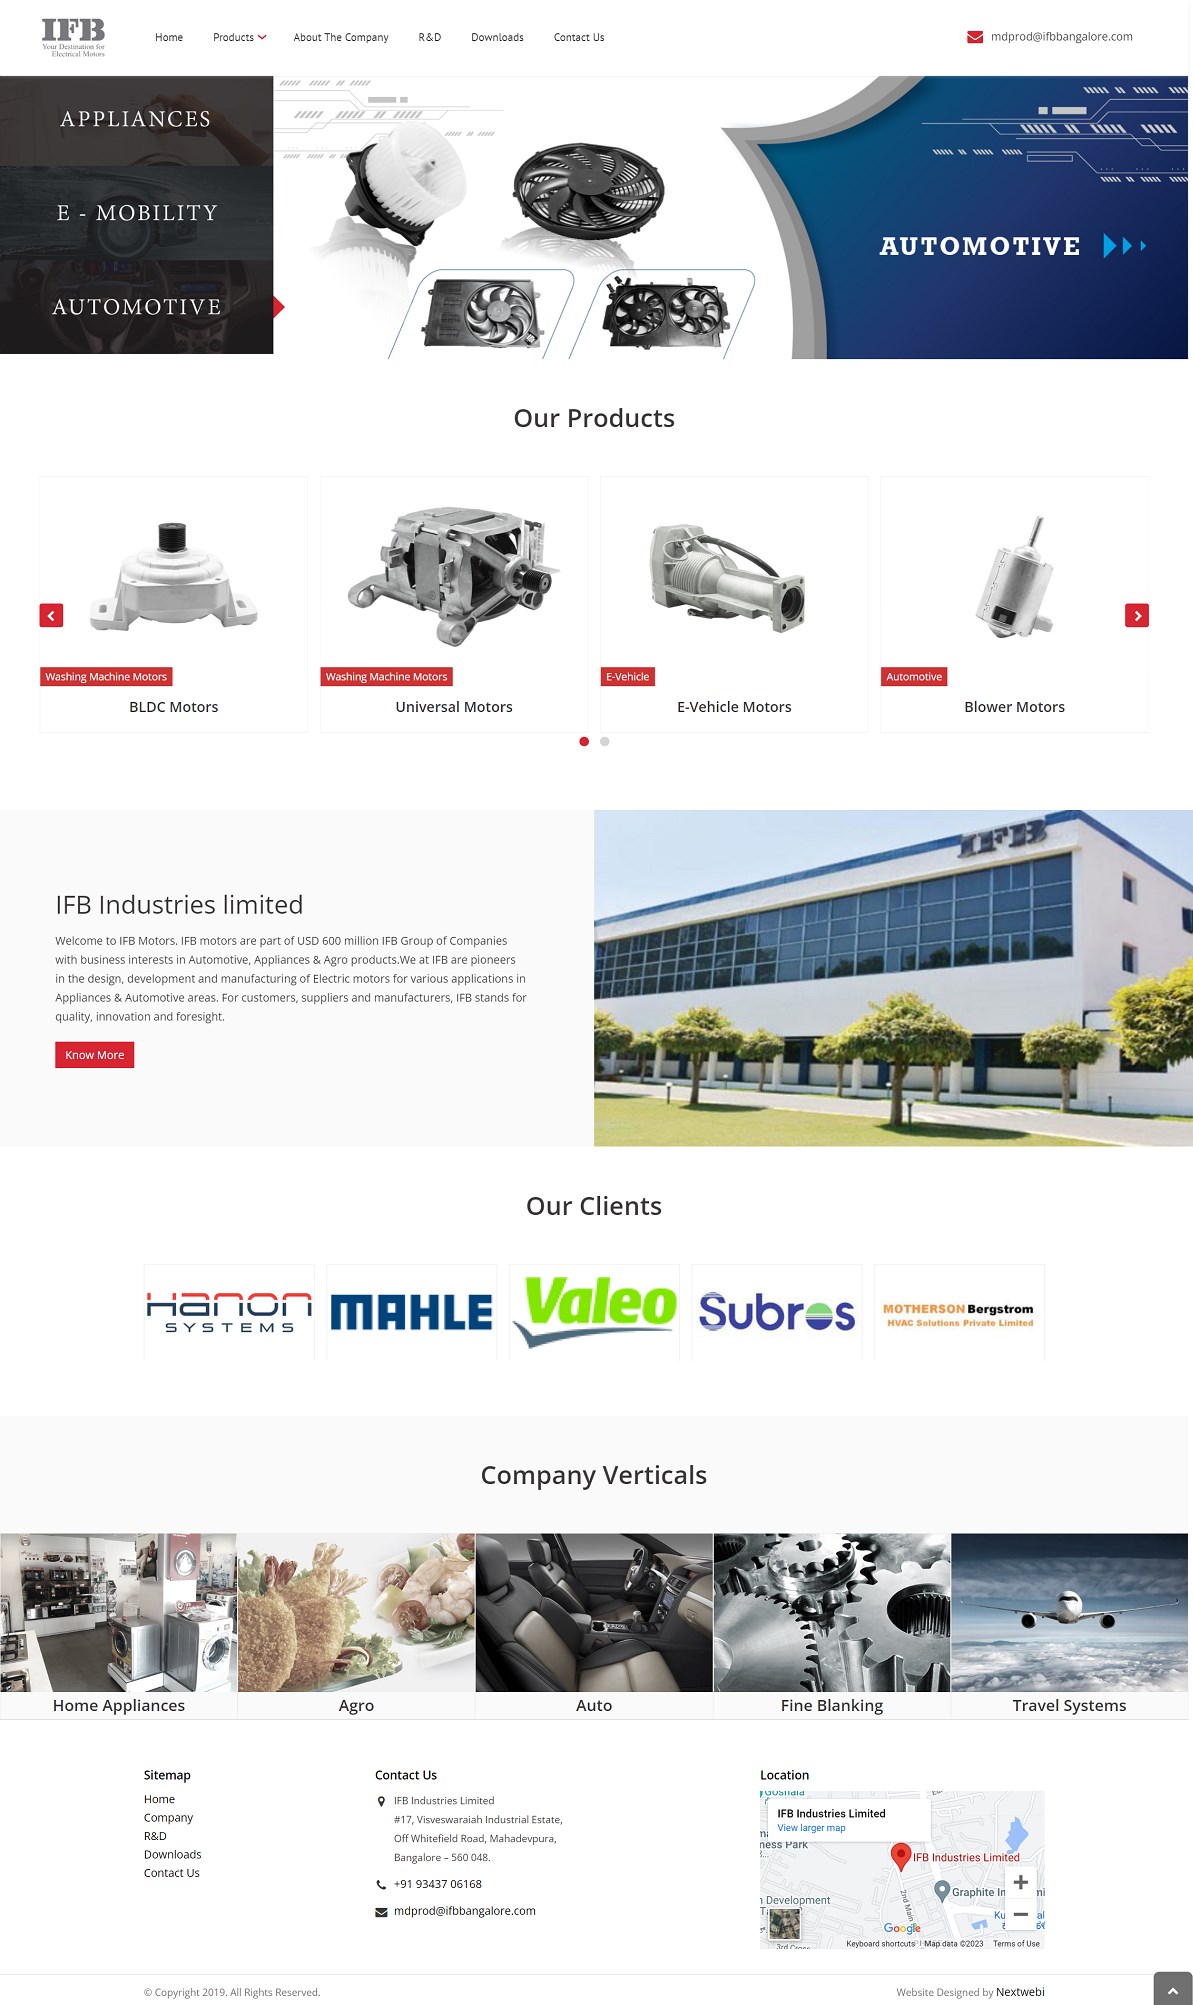 Home page summarising about the brand